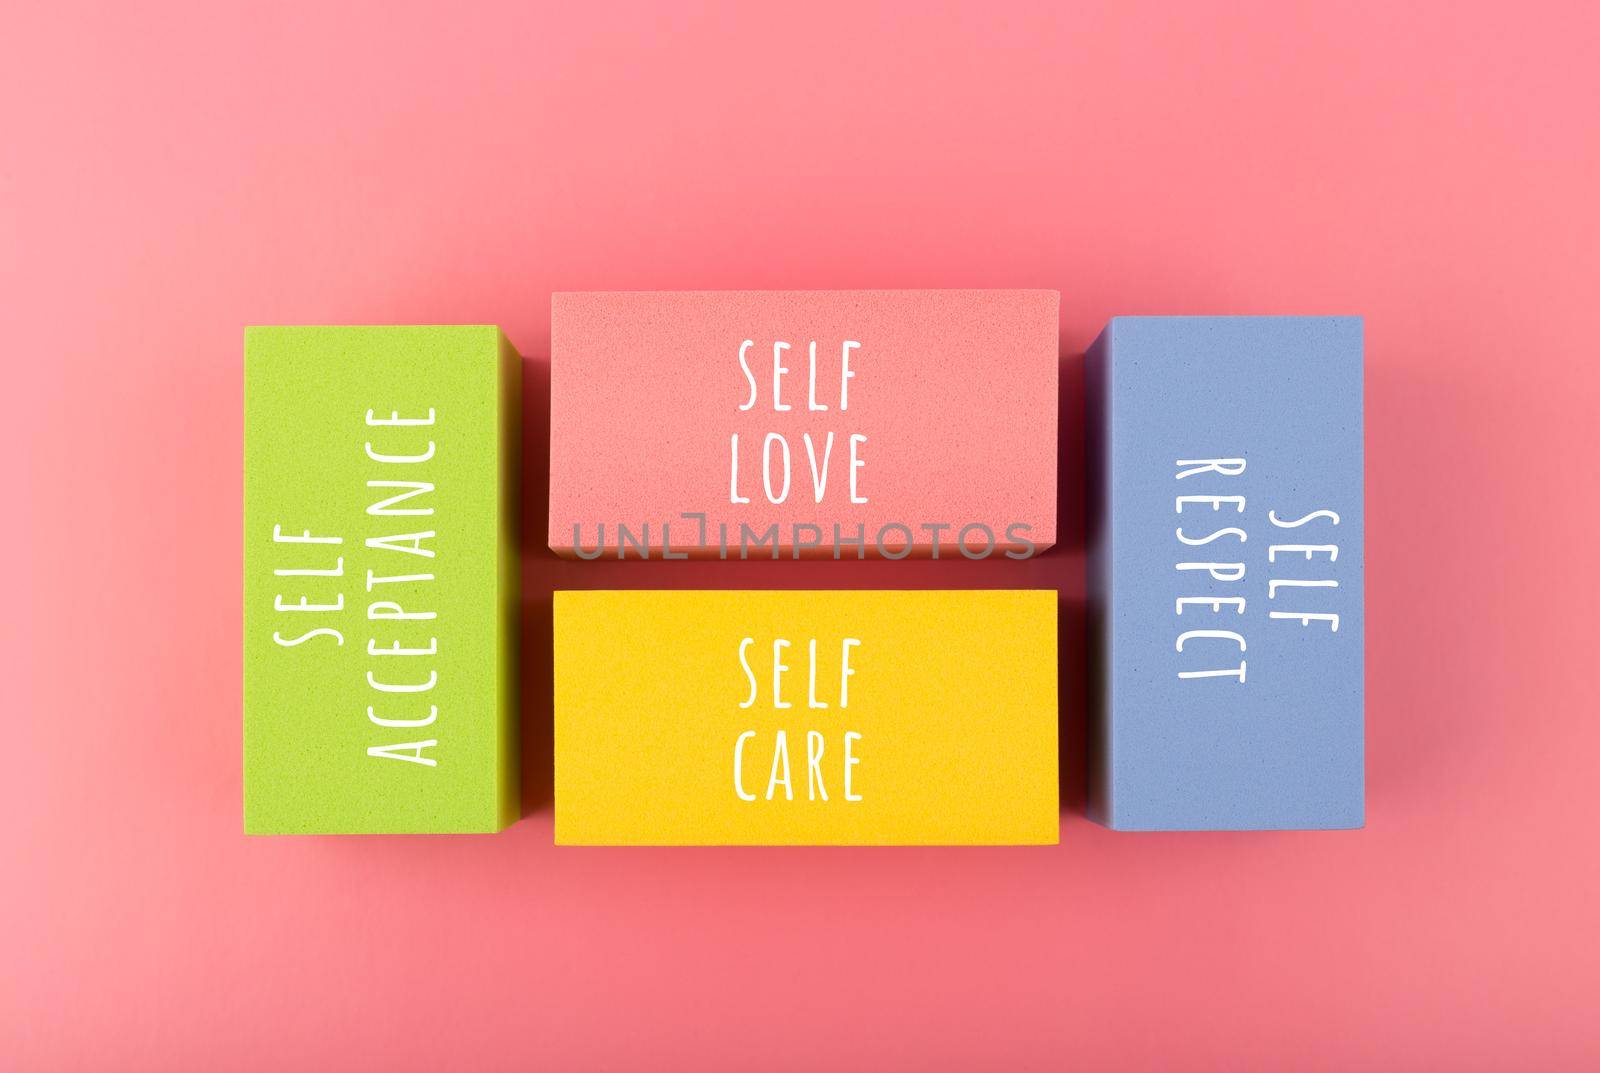 Self respect, acceptance, care and love written on multicolored rectangles. Mental health, self love and wellness concept by Senorina_Irina